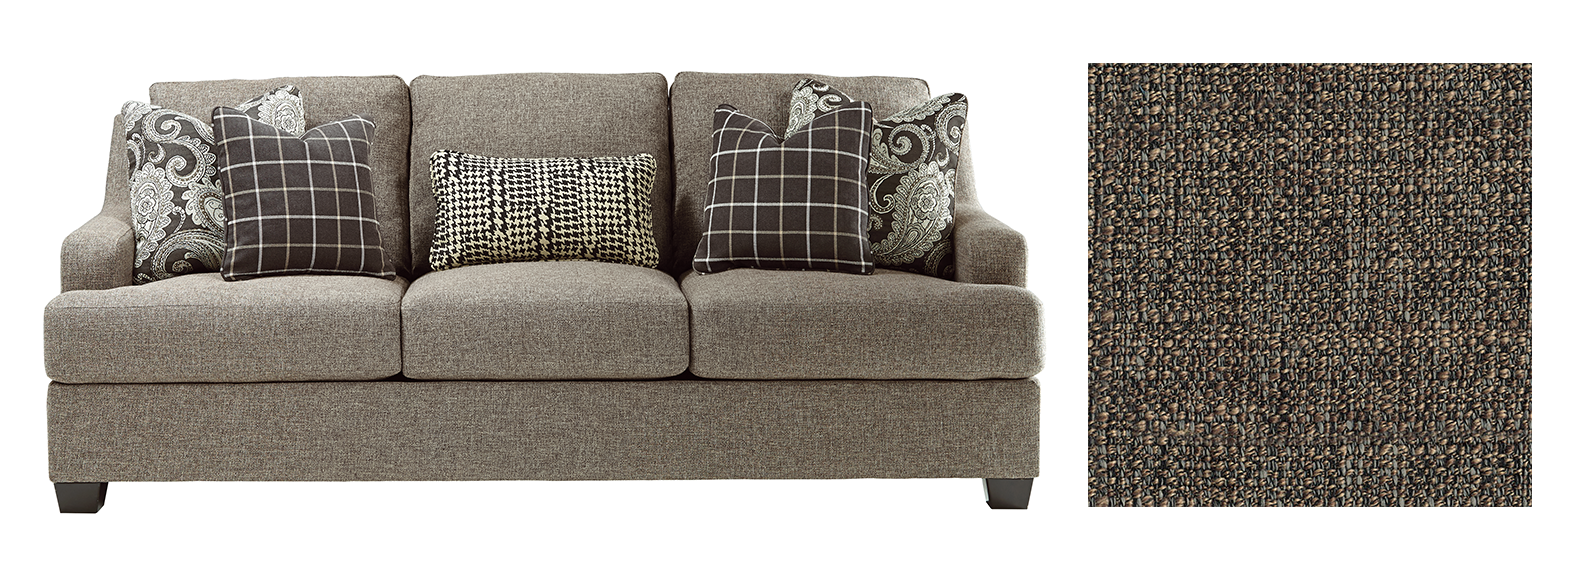 Light gray grainy sofa with dark colored pillows with a paisley design. 